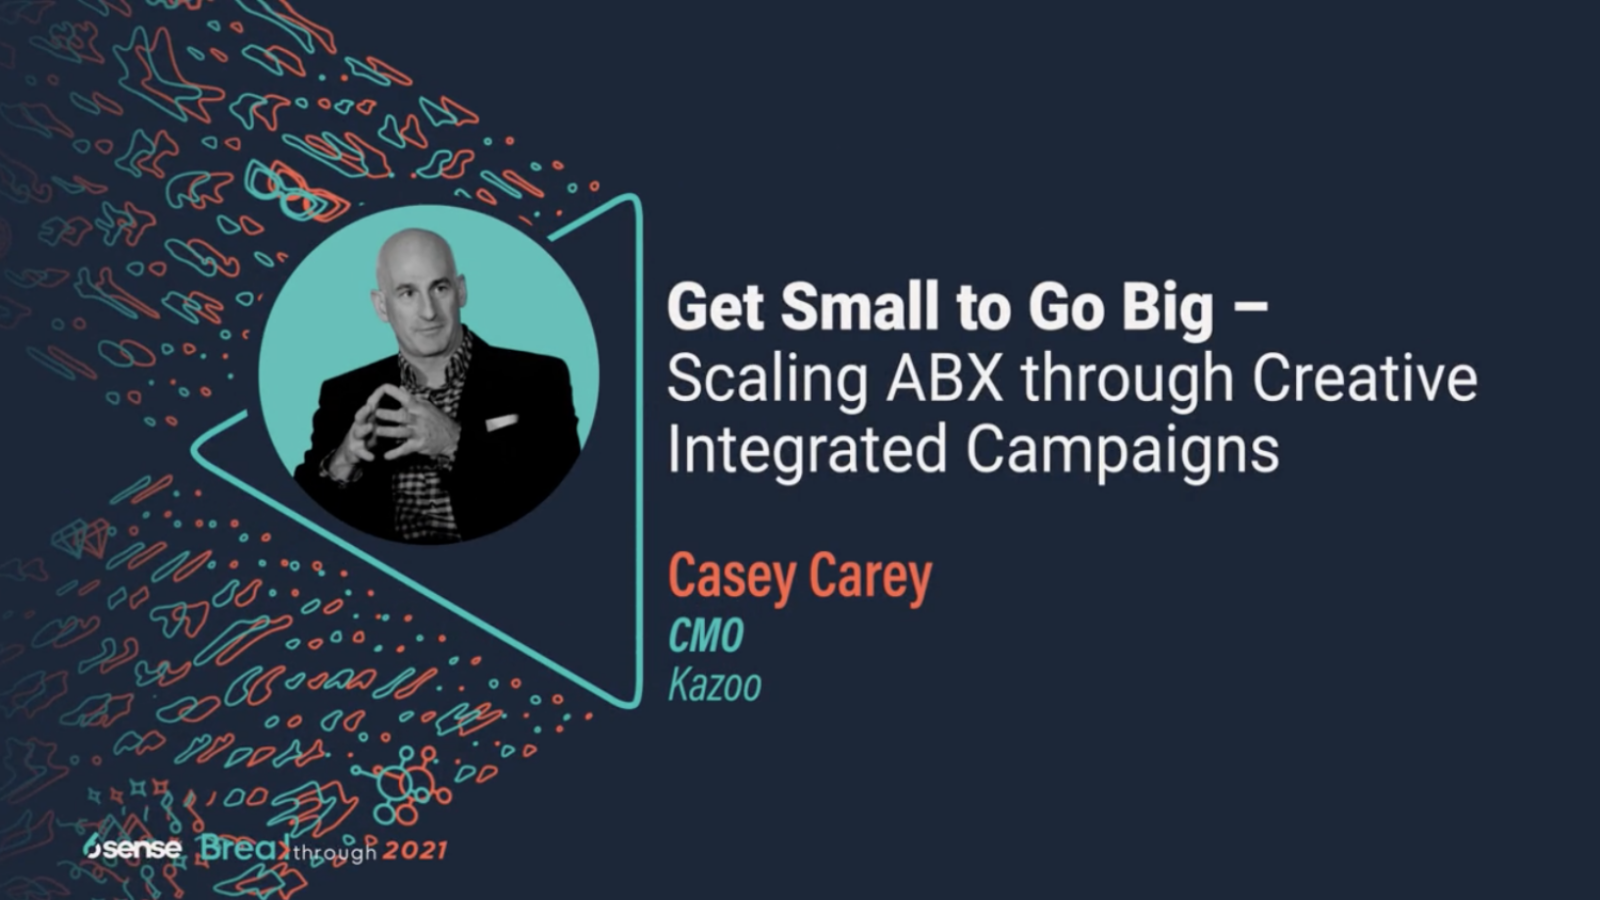 Get Small to Go Big — Scaling ABX through Creative Integrated Campaigns